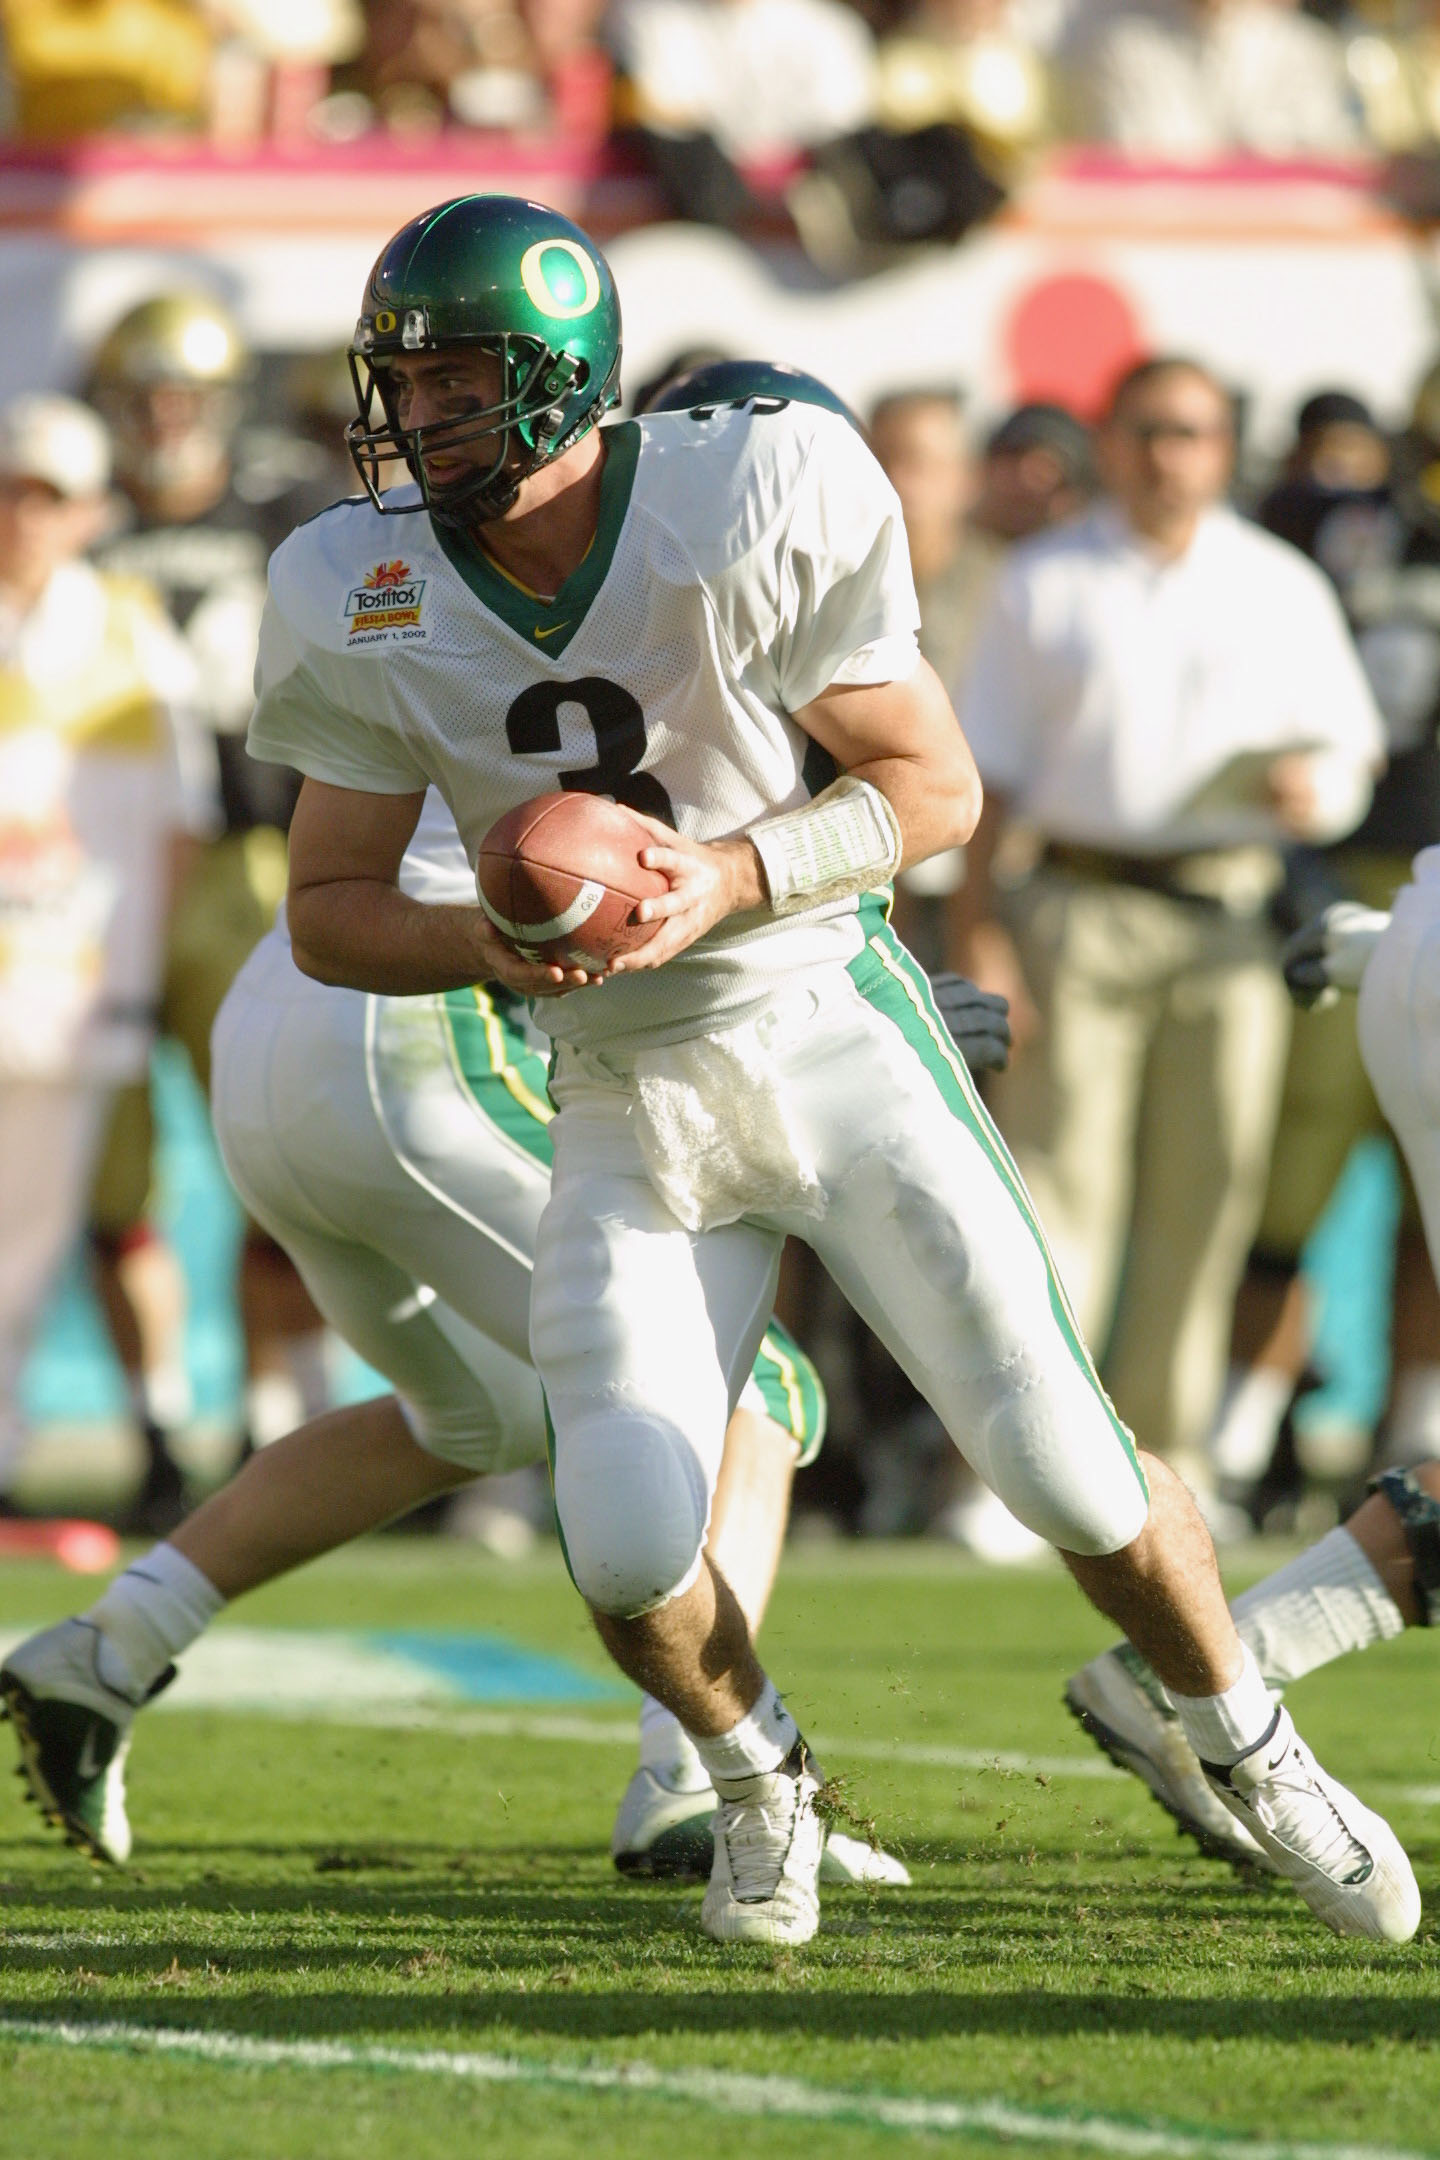 01 Jan 2002 : Quarterback Joey Harrington of Oregon looks for an opening against Colorado during the game at the  Fiesta Bowl at Sun Devil Stadium in Tempe, Arizona. The Oregon Ducks won 38-16. DIGITAL IMAGE. Mandatory Credit: Jeff Gross/Getty Images